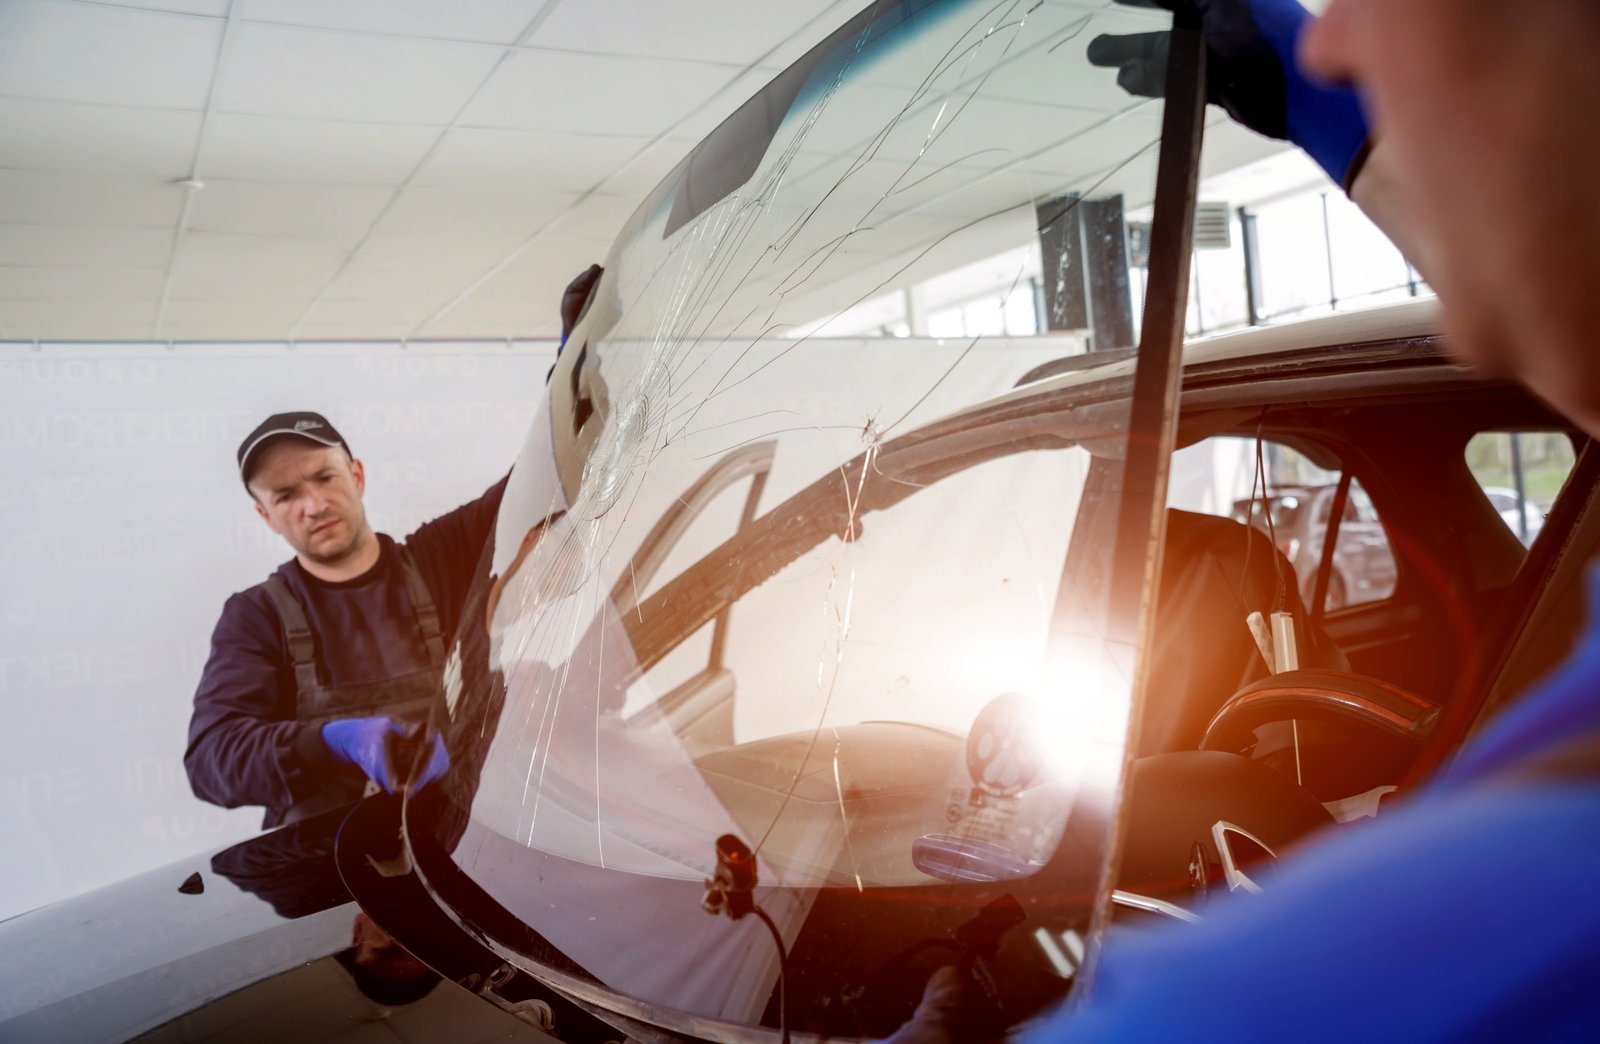 The Safety Impact: How Auto Glass Repairs Can Save Lives